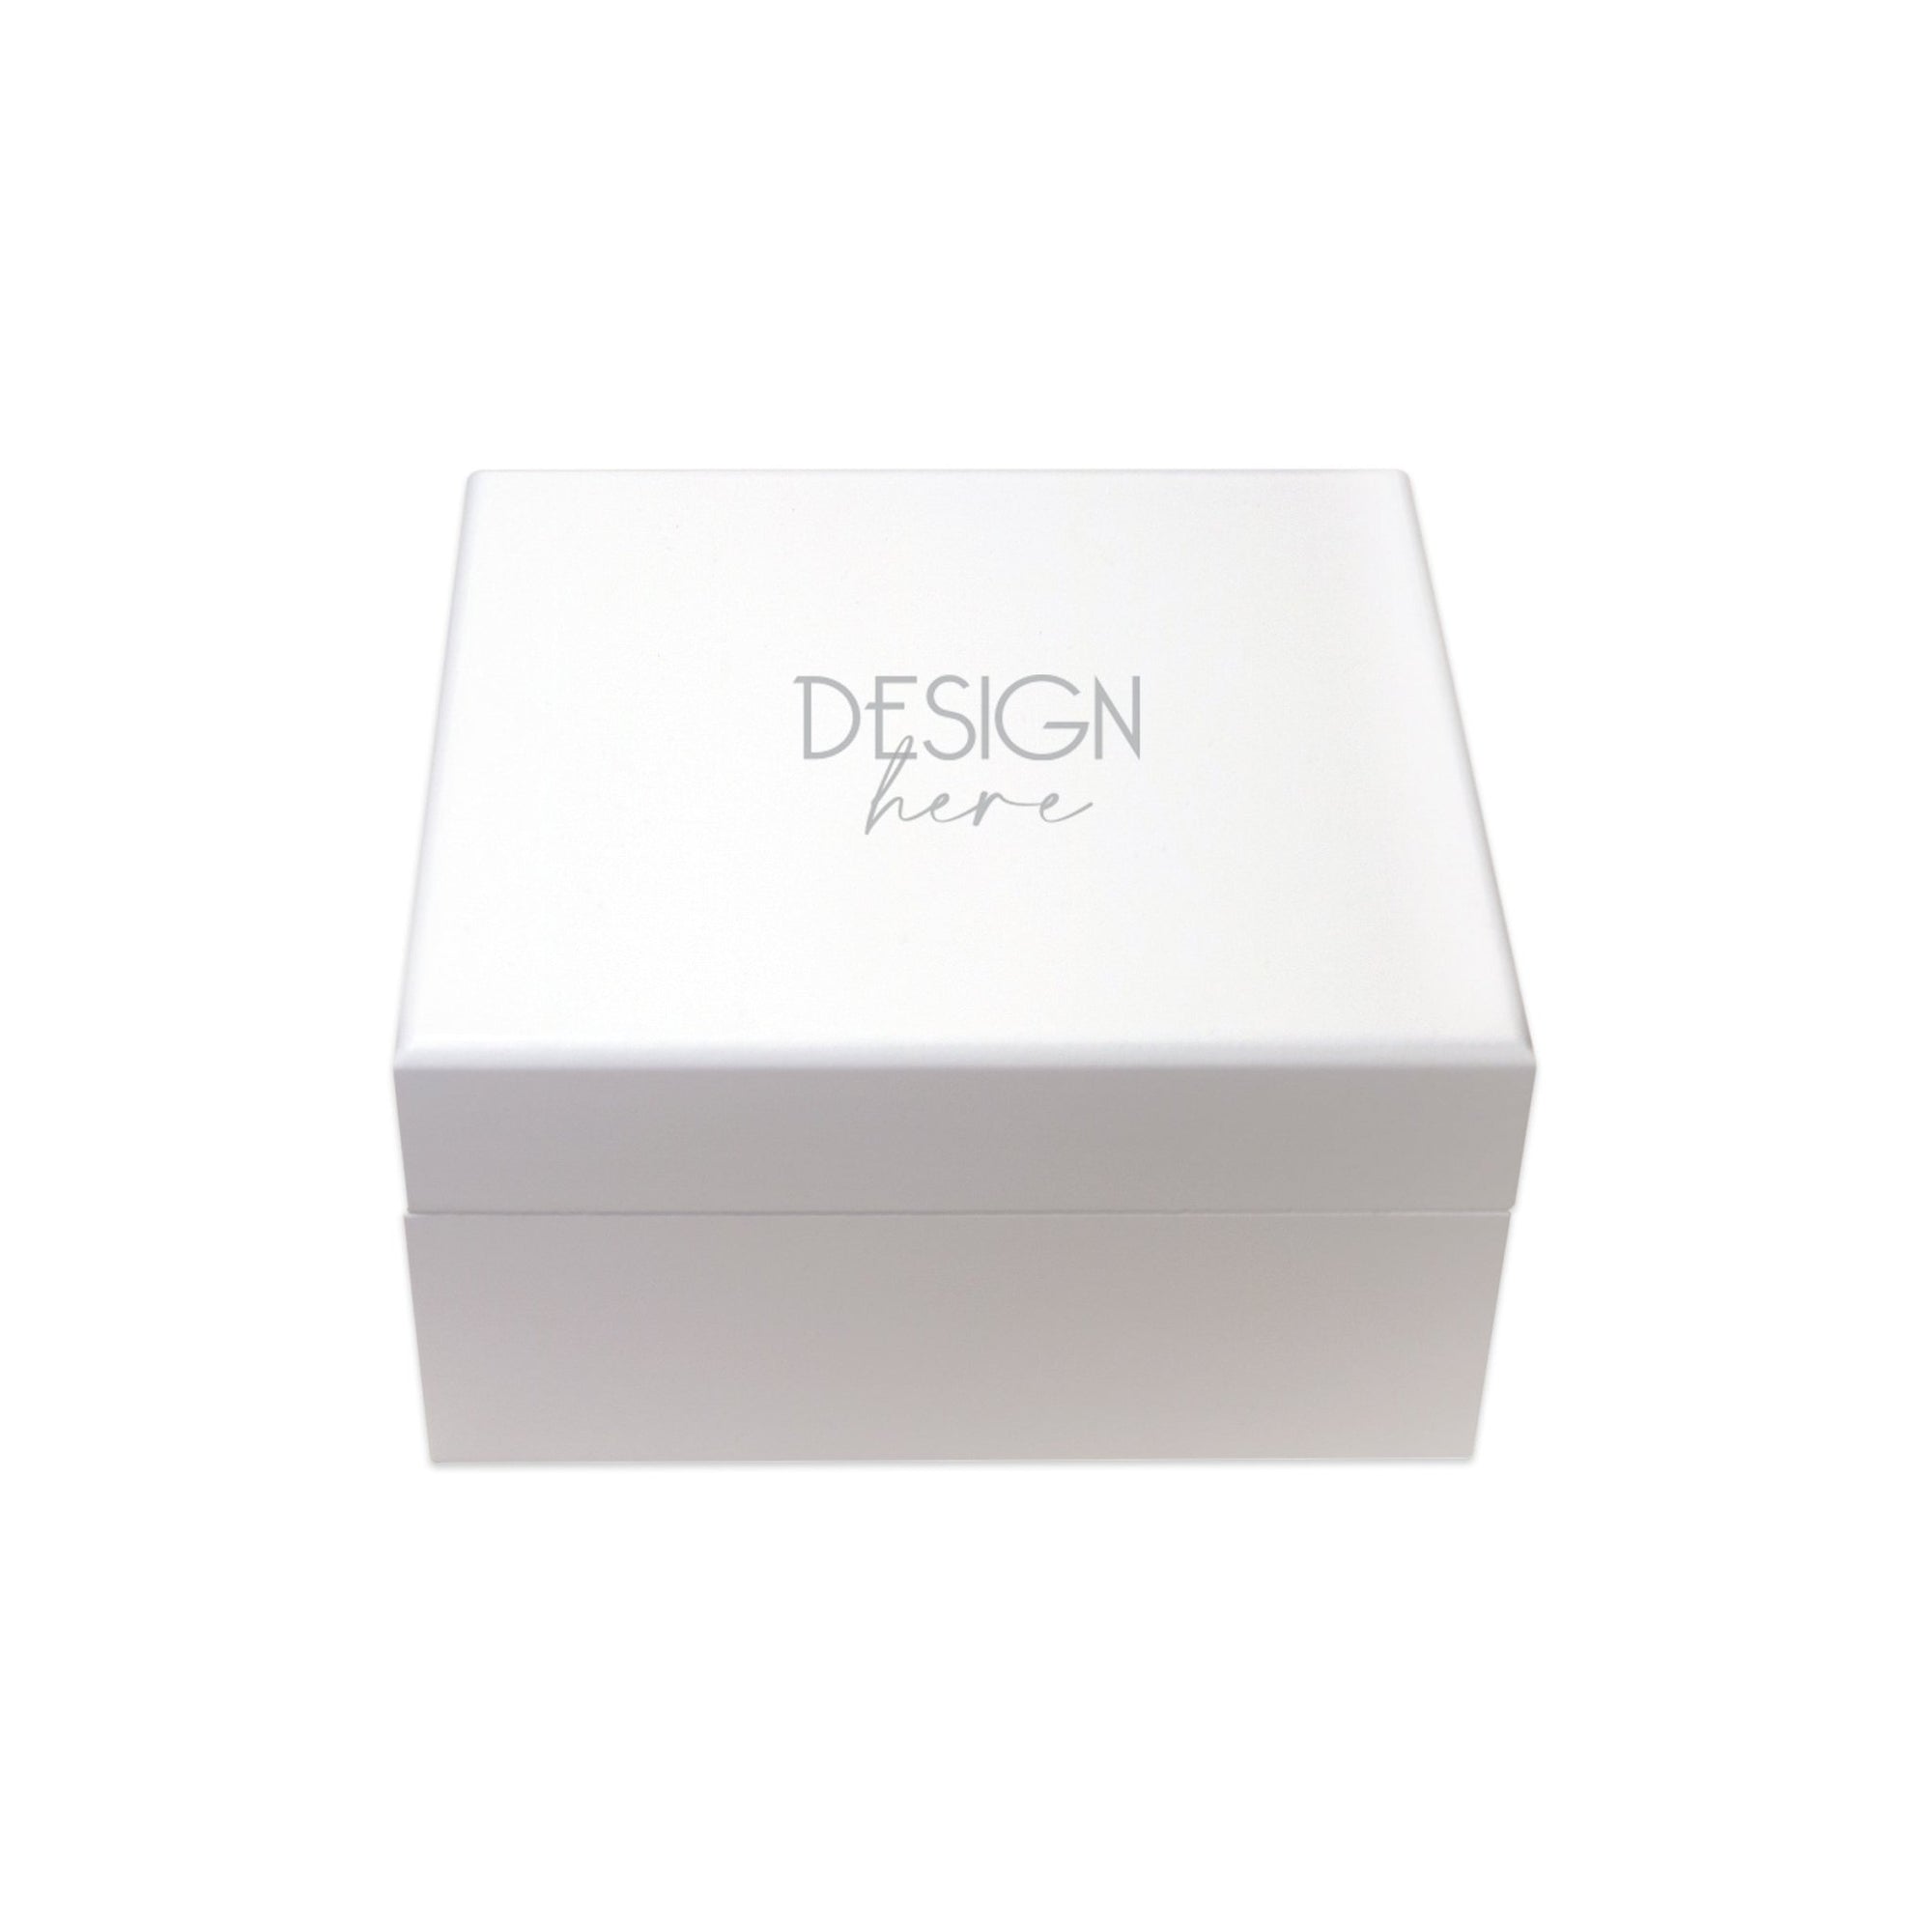 Modern Inspirational White Jewelry Keepsake Box for Aunt 6x5.5in - A Gift From Heaven - LifeSong Milestones